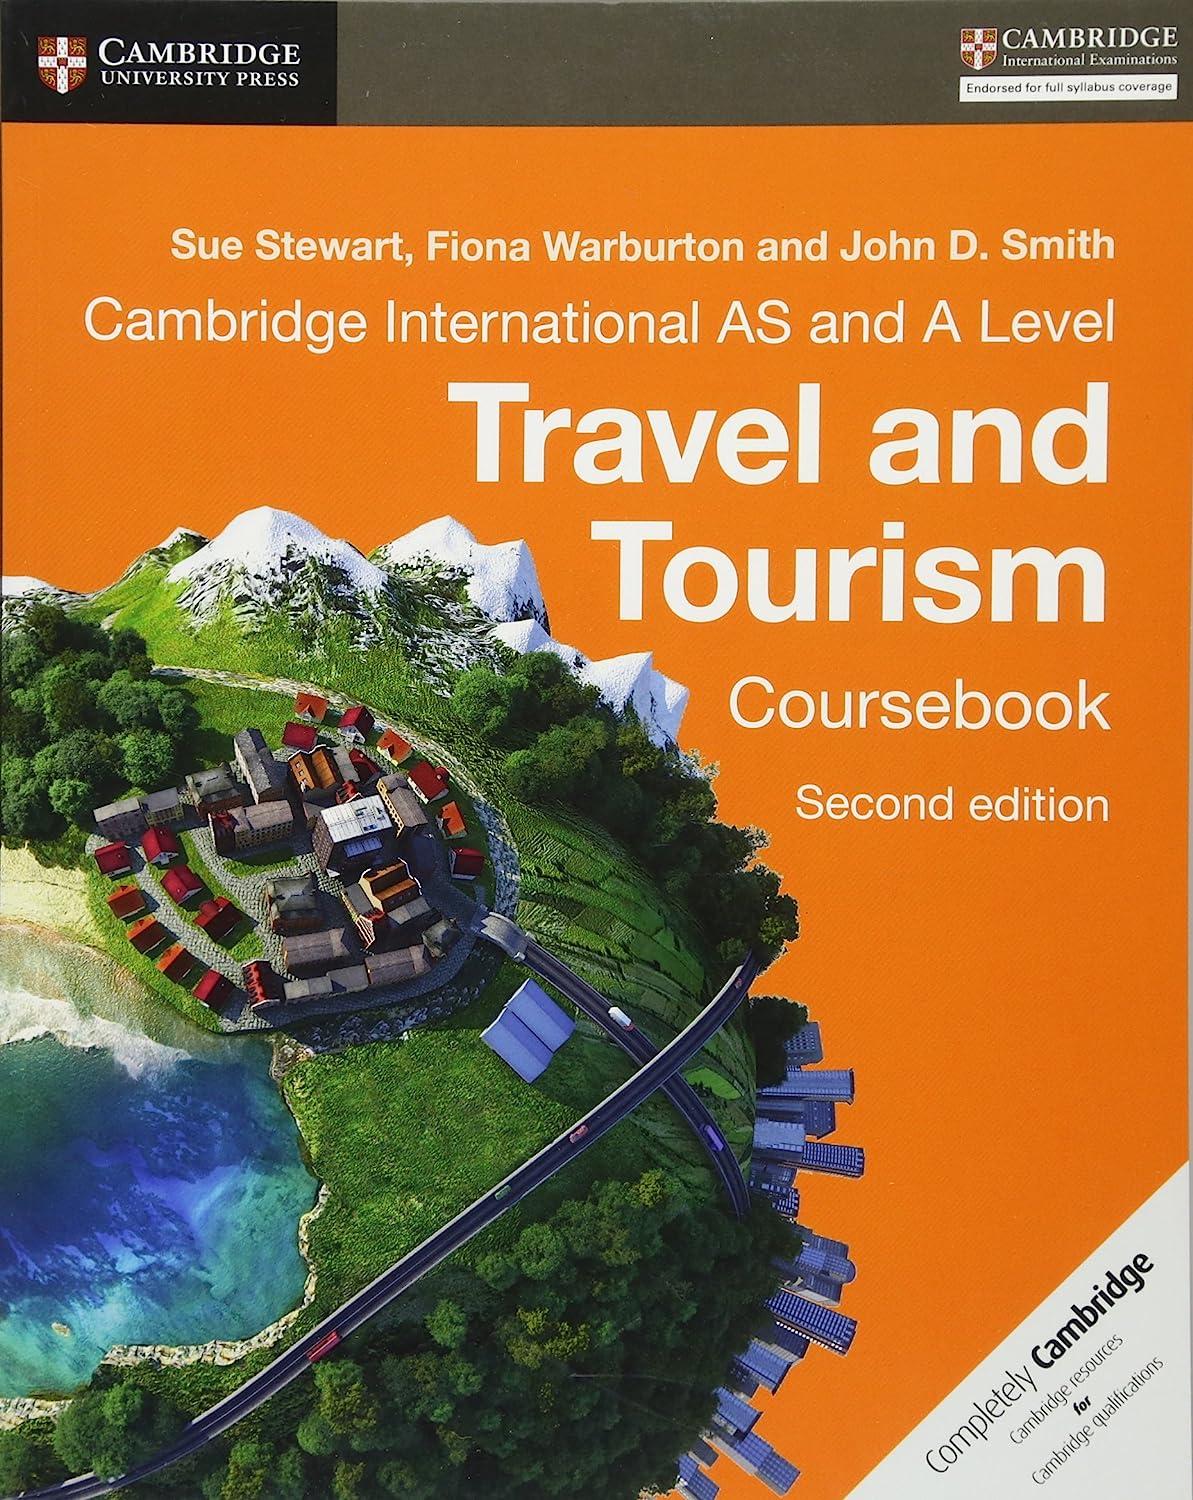 cambridge international as and a level travel and tourism coursebook 2nd edition sue stewart, fiona